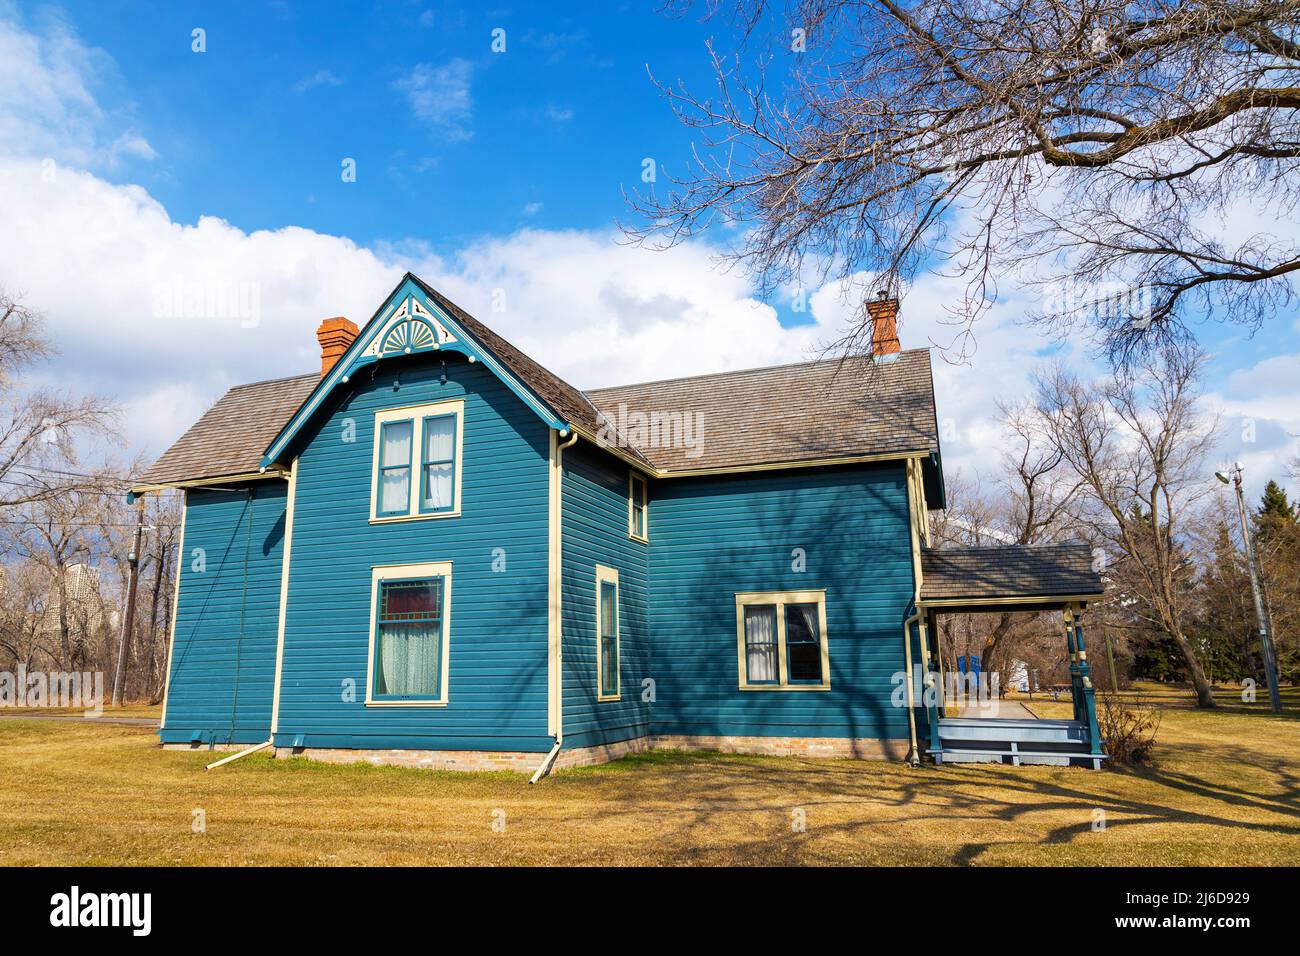 EDMONTON, CANADA - APRIL 17, 2022: The Third House, built between 1899 and 1901, at the John Walter Museum in Edmonton. The site interprets the life o Stock Photo